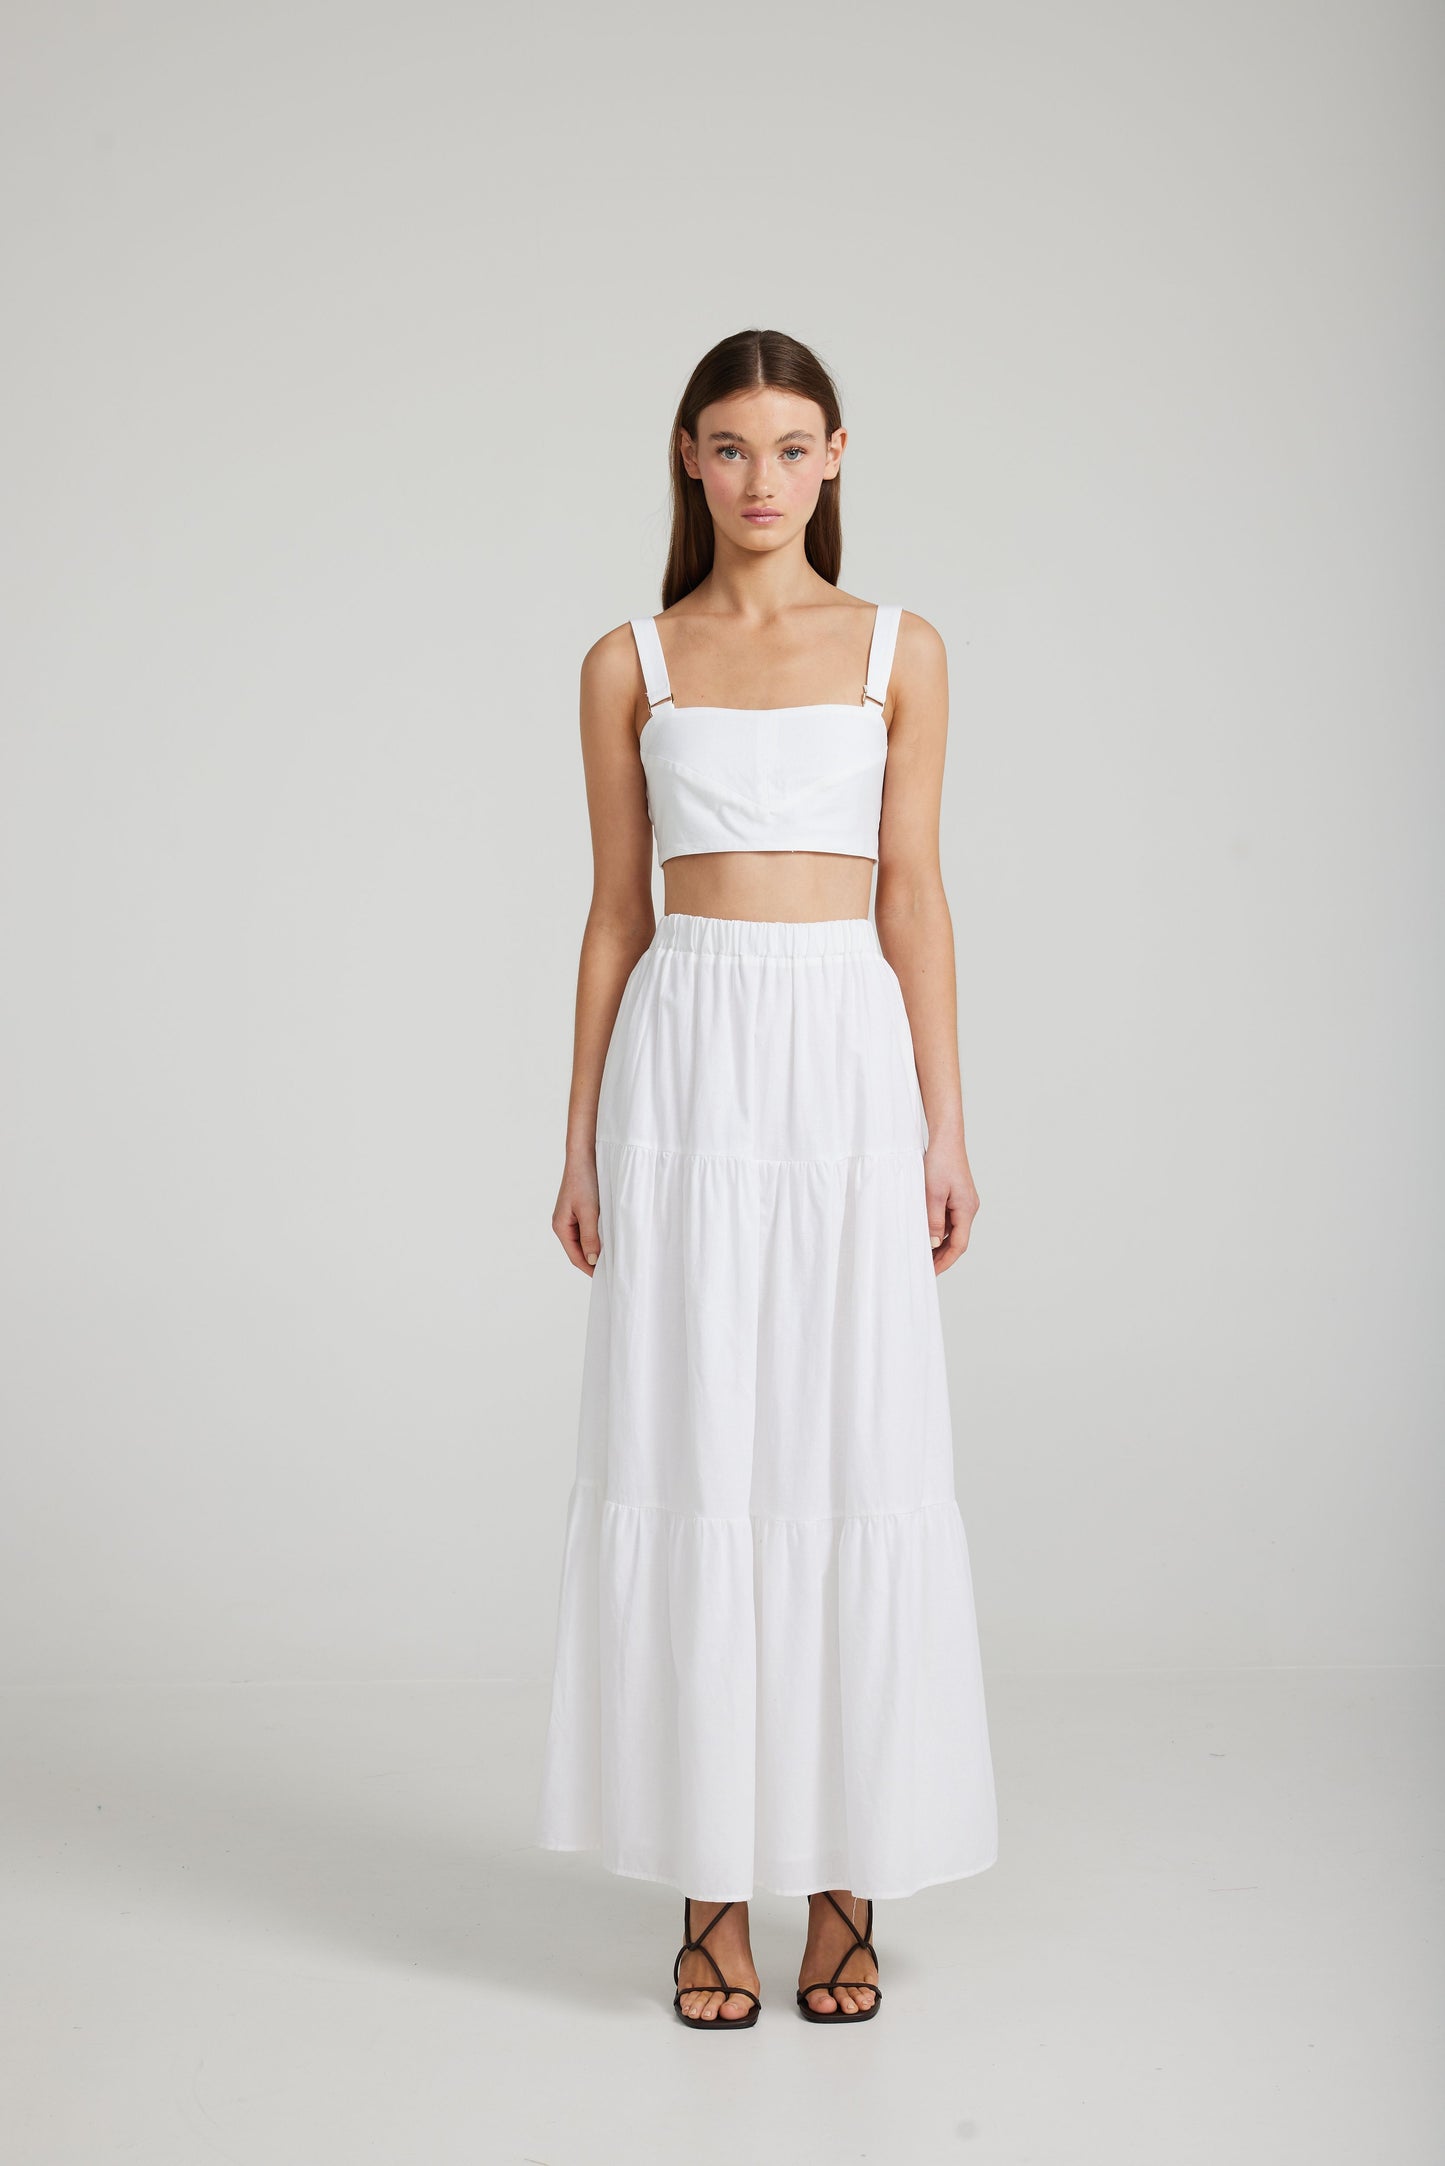 Tyra Maxi Skirt in White by Daisy Says